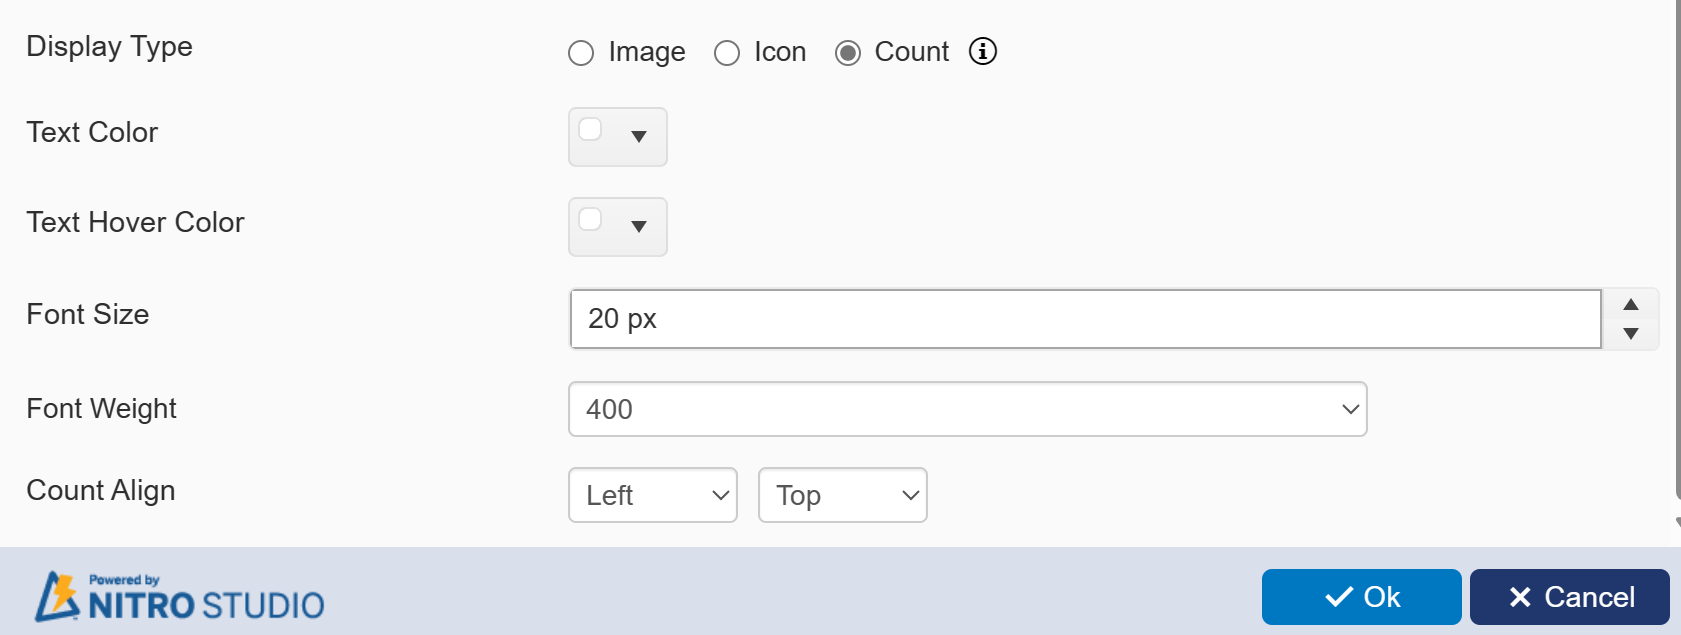 Count tile in List view